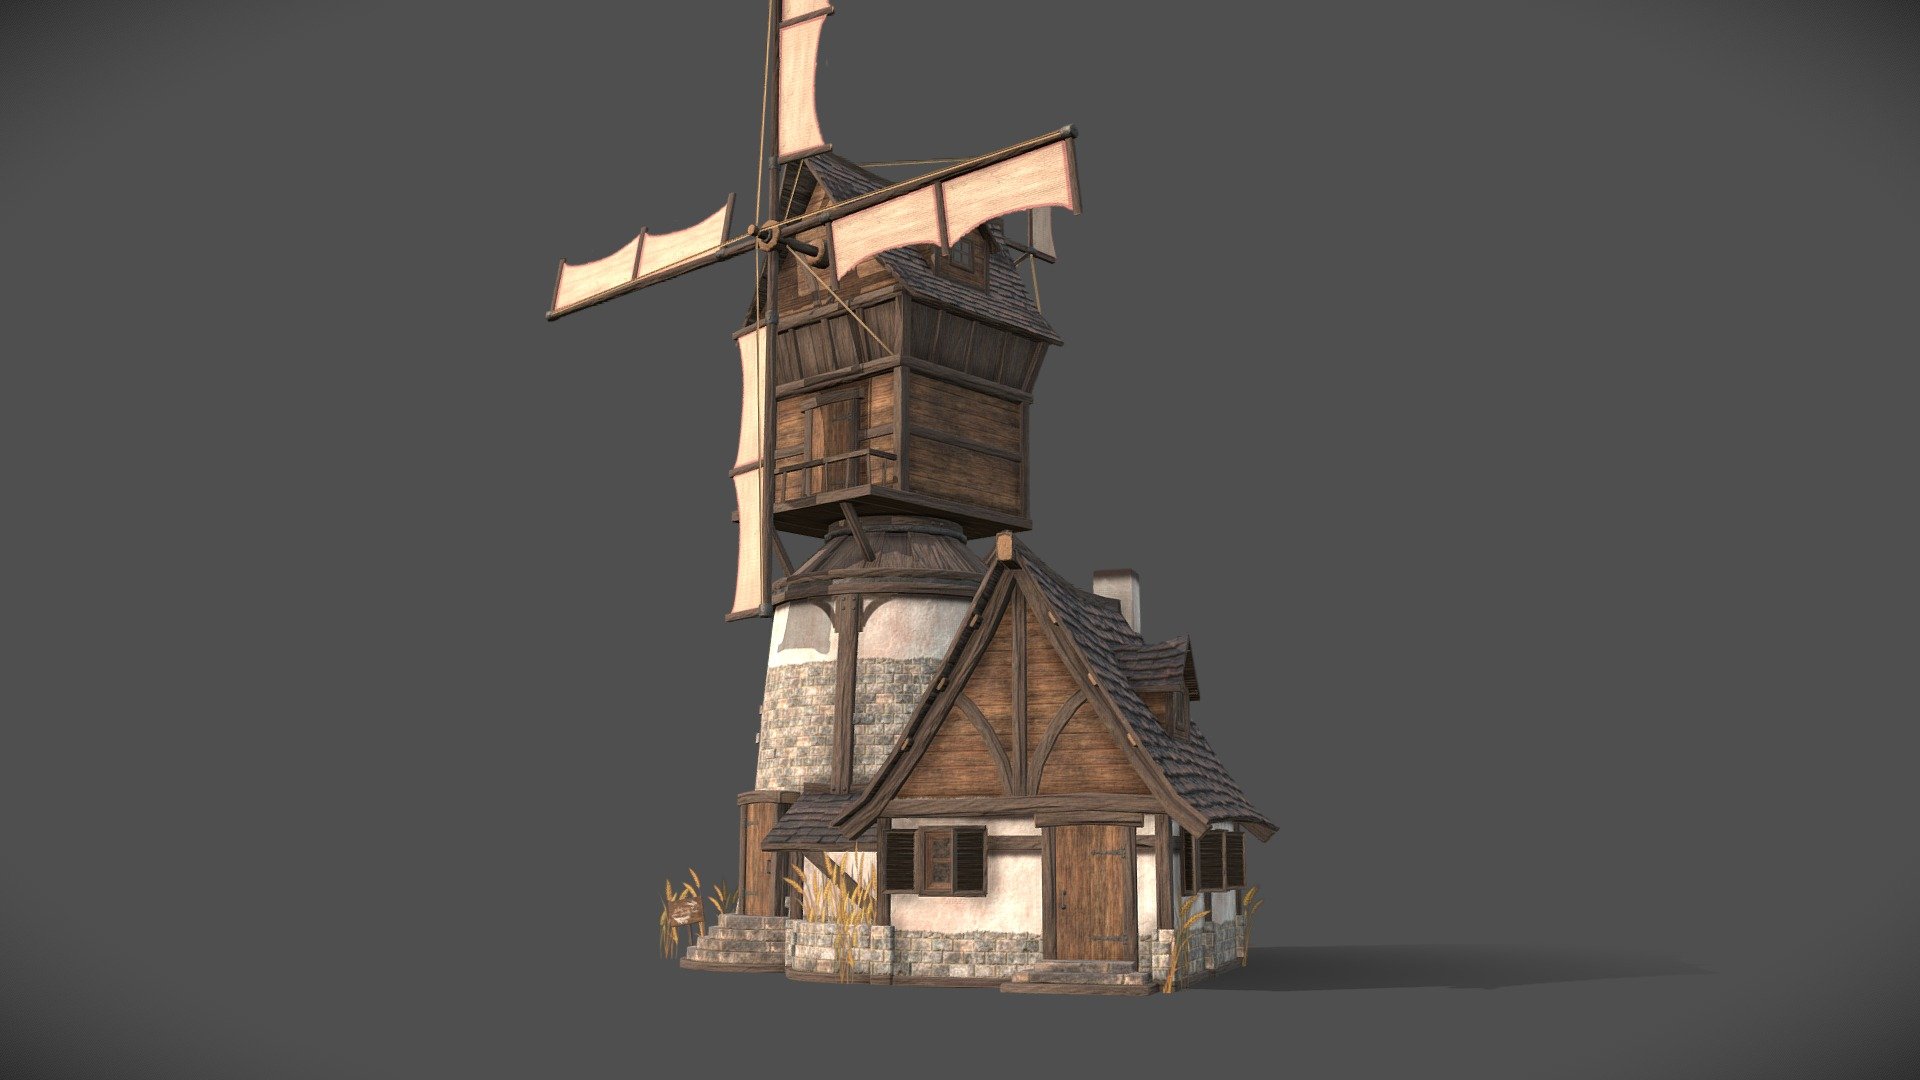 NAD-TP1-GENERIQUE-H22

This is my 1st project of the 2nd semester at NAD school.
Lowpoly windmill and small shack textured with generic and atlas material. (6490 triangles)
I took some of the texture at wonderfull https://share-legacy.substance3d.com/. Thanks to all the texture artistes that gave those materials on this website so I could explore further options on substance painter.
I'm gratefull for what I've learned during this super fun project, especially about optimisation and generic texture.

Like/follow/comment/hug/kiss/do something if you download plz
xox - Windmill (game ready) - Download Free 3D model by FrancisLam. (@francislam) 3d model